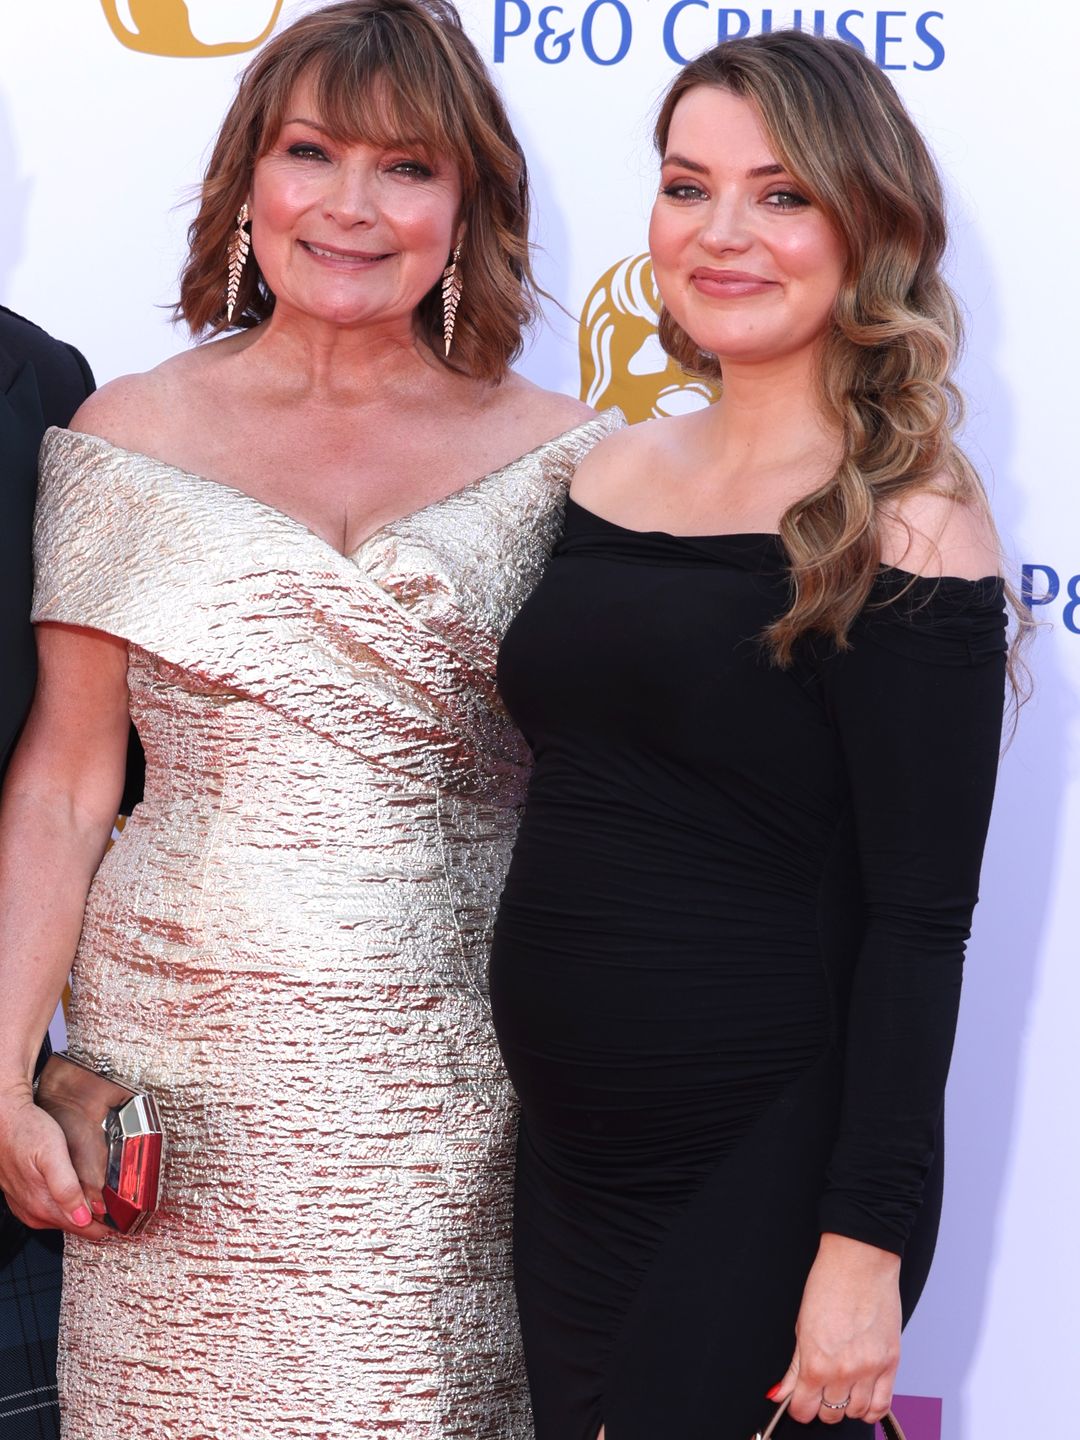 Lorraine Kelly in a gold dress with her daughter Rosie in a bump-skimming black dress